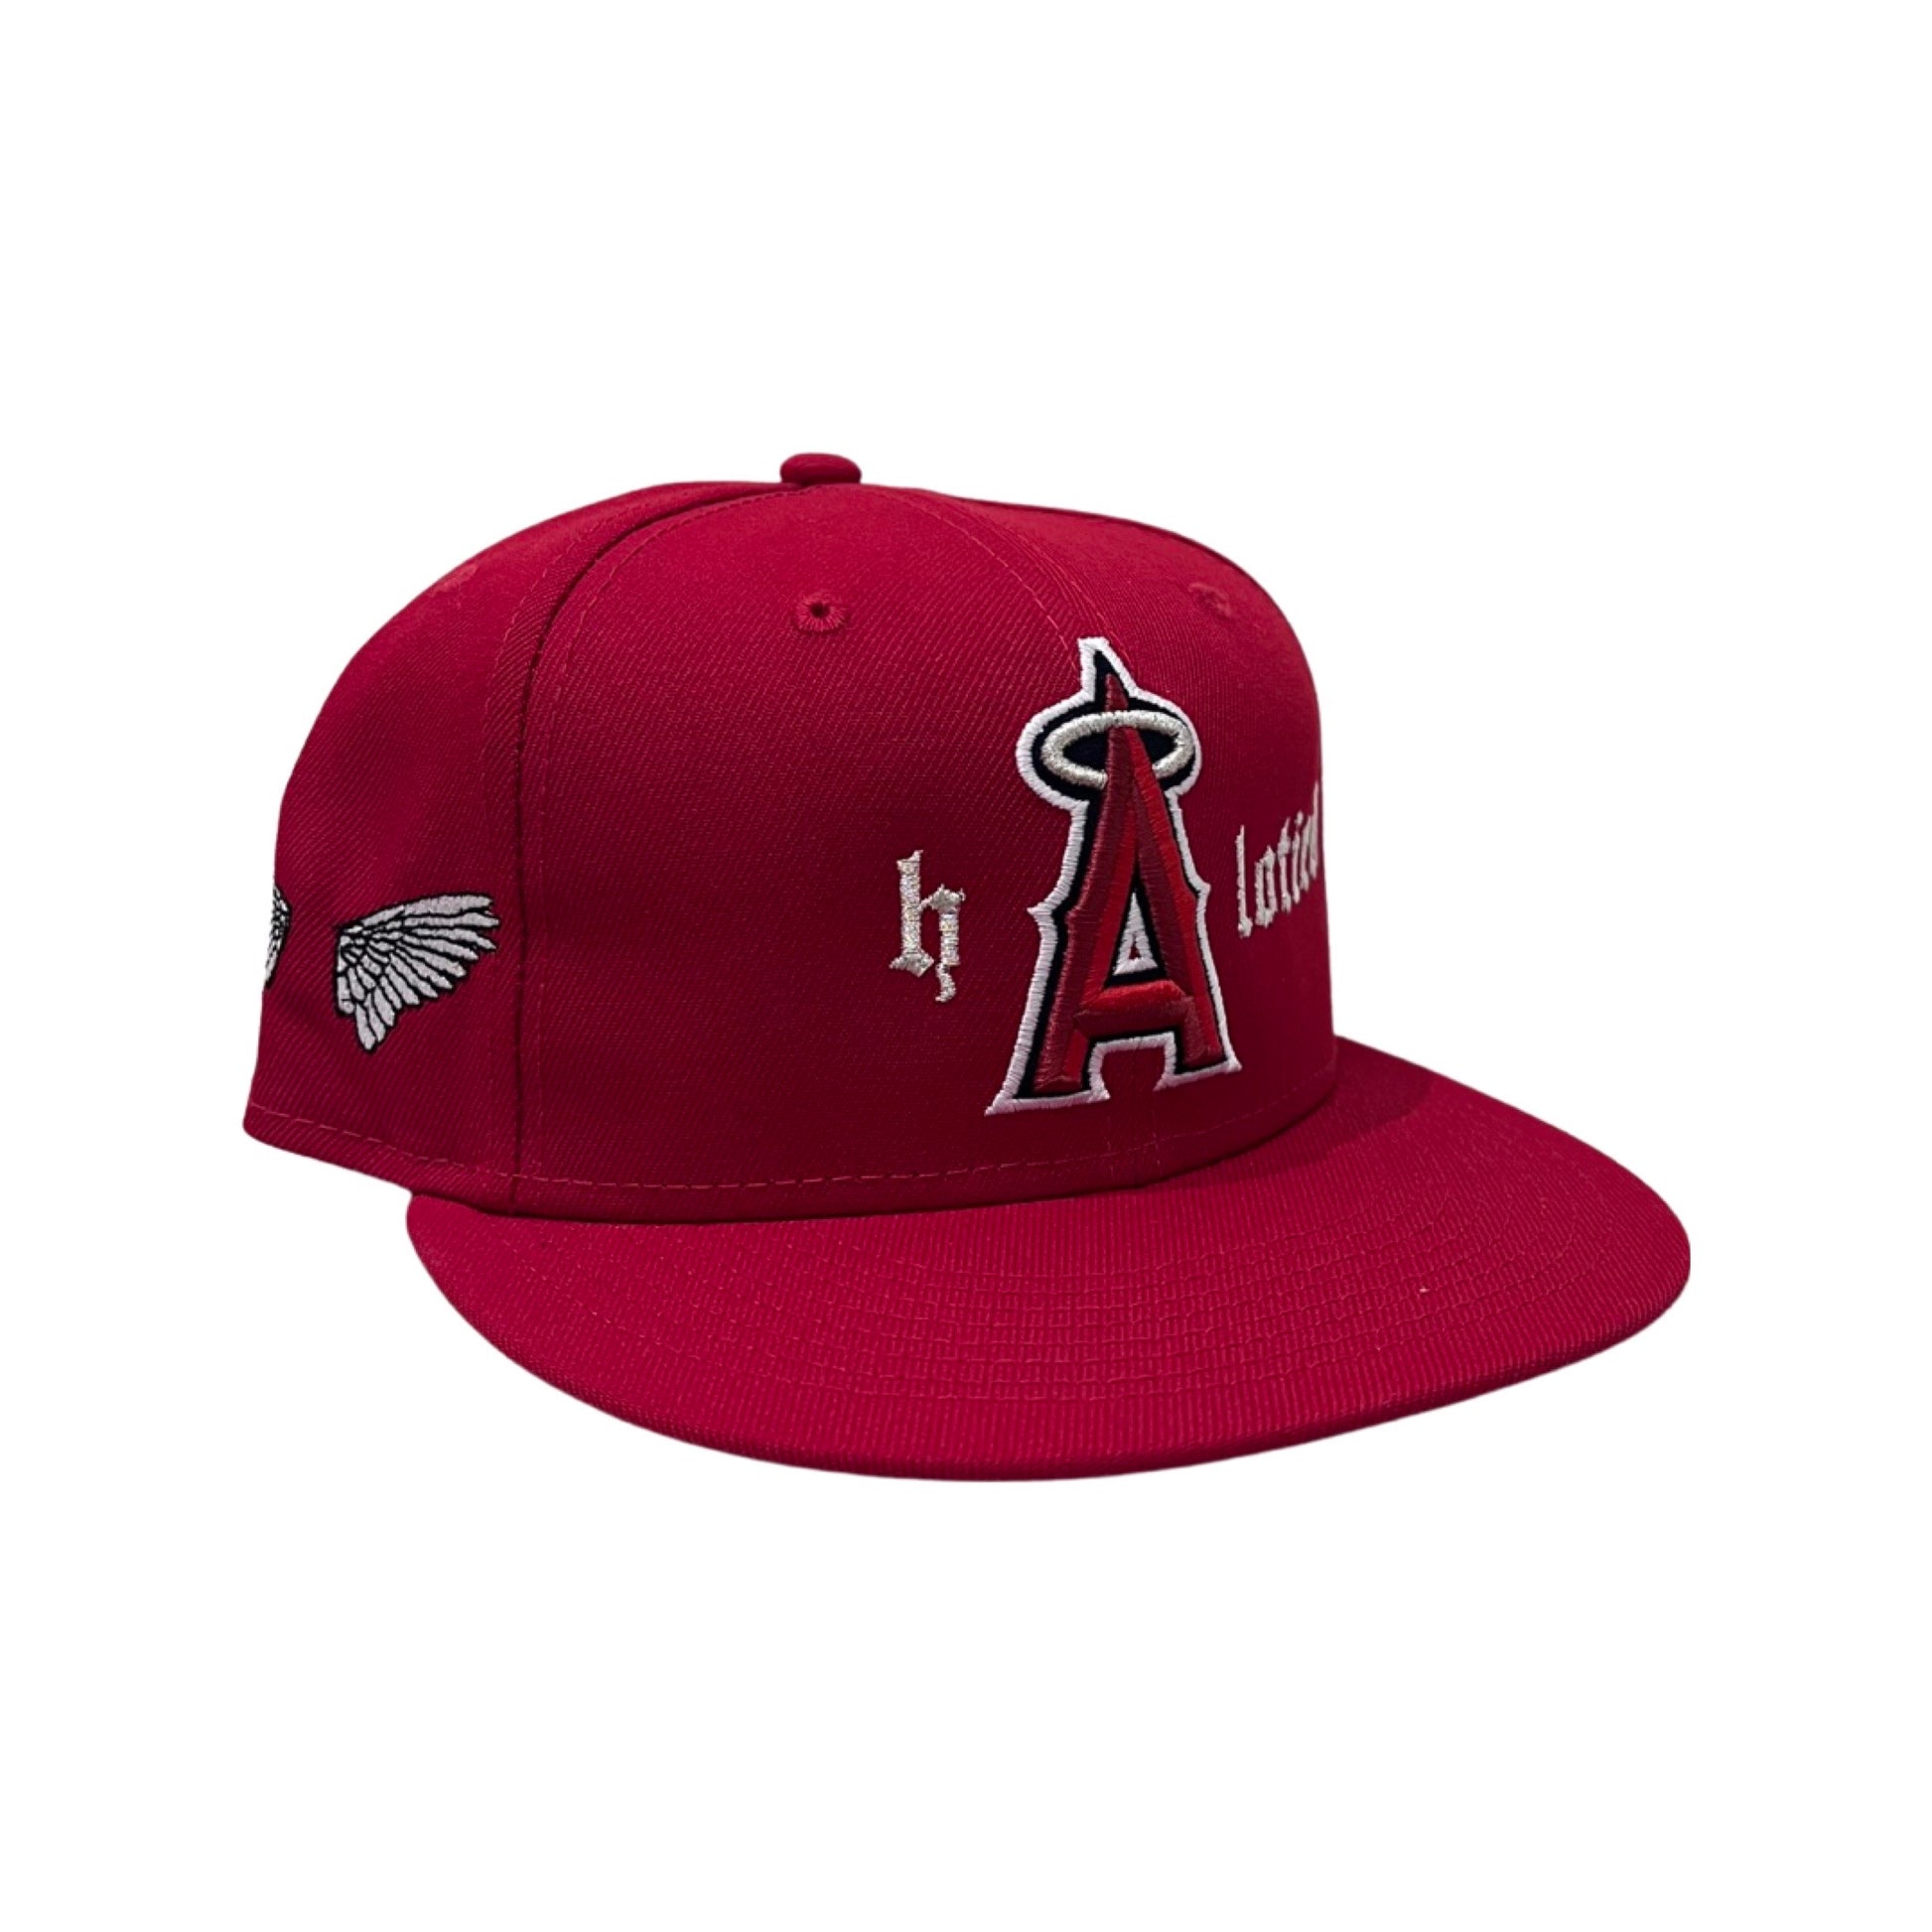 El Cocho New Era 59FIFTY Fitted Hat 7 3/4